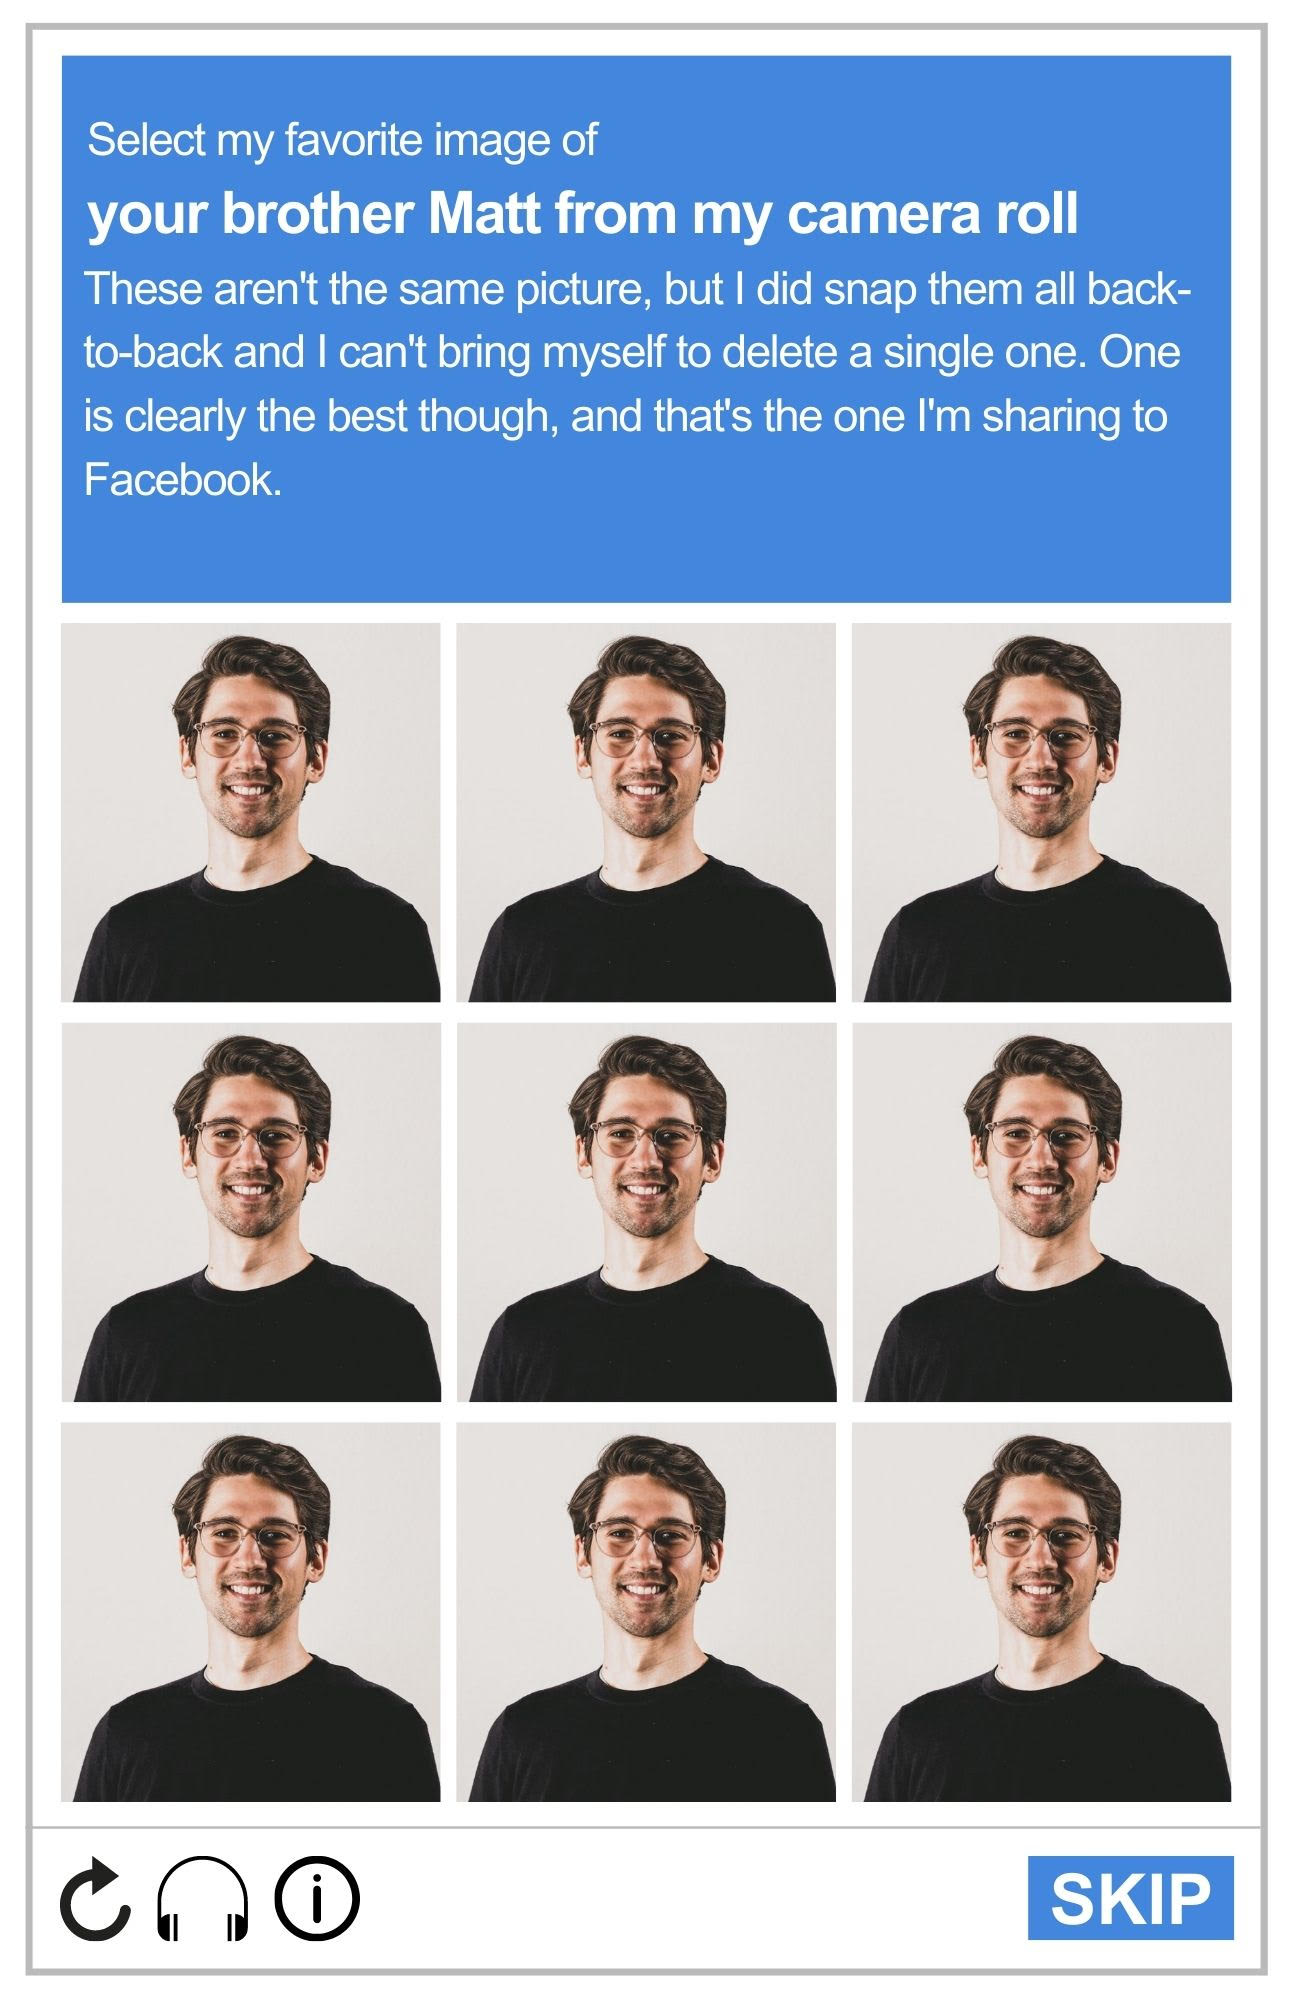 Image of a reCAPTCHA board, featuring the nine headshots of a  20-something man. The photos all appear to be the same. The prompt reads: Select my favorite photo of your brother Matt from my camera roll. These aren't the same picture, but I did snap them all back-to-back, and I can't bring myself to delete a single one. One clearly is the best, though. That's the one I'm sharing on Facebook.